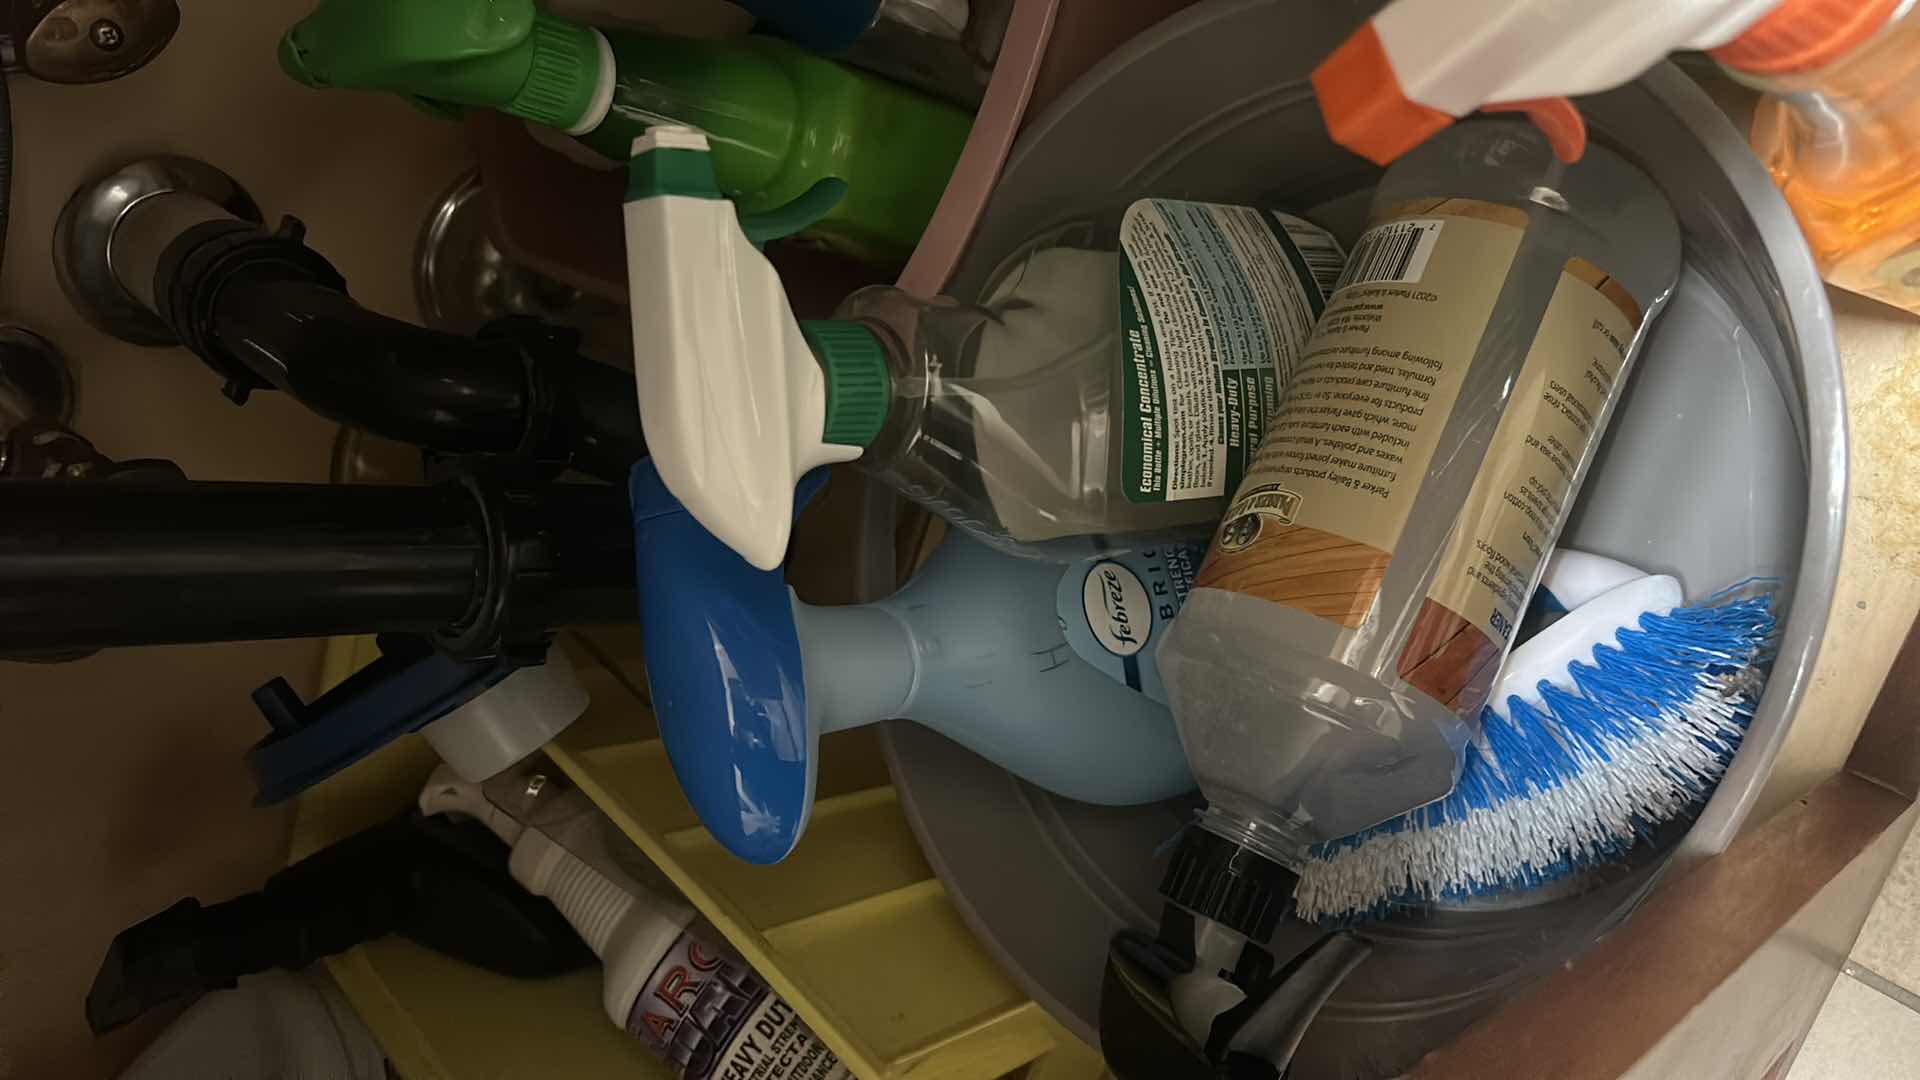 Photo 6 of CLEANING SUPPLIES UNDER SINK IN LAUNDRY ROOM